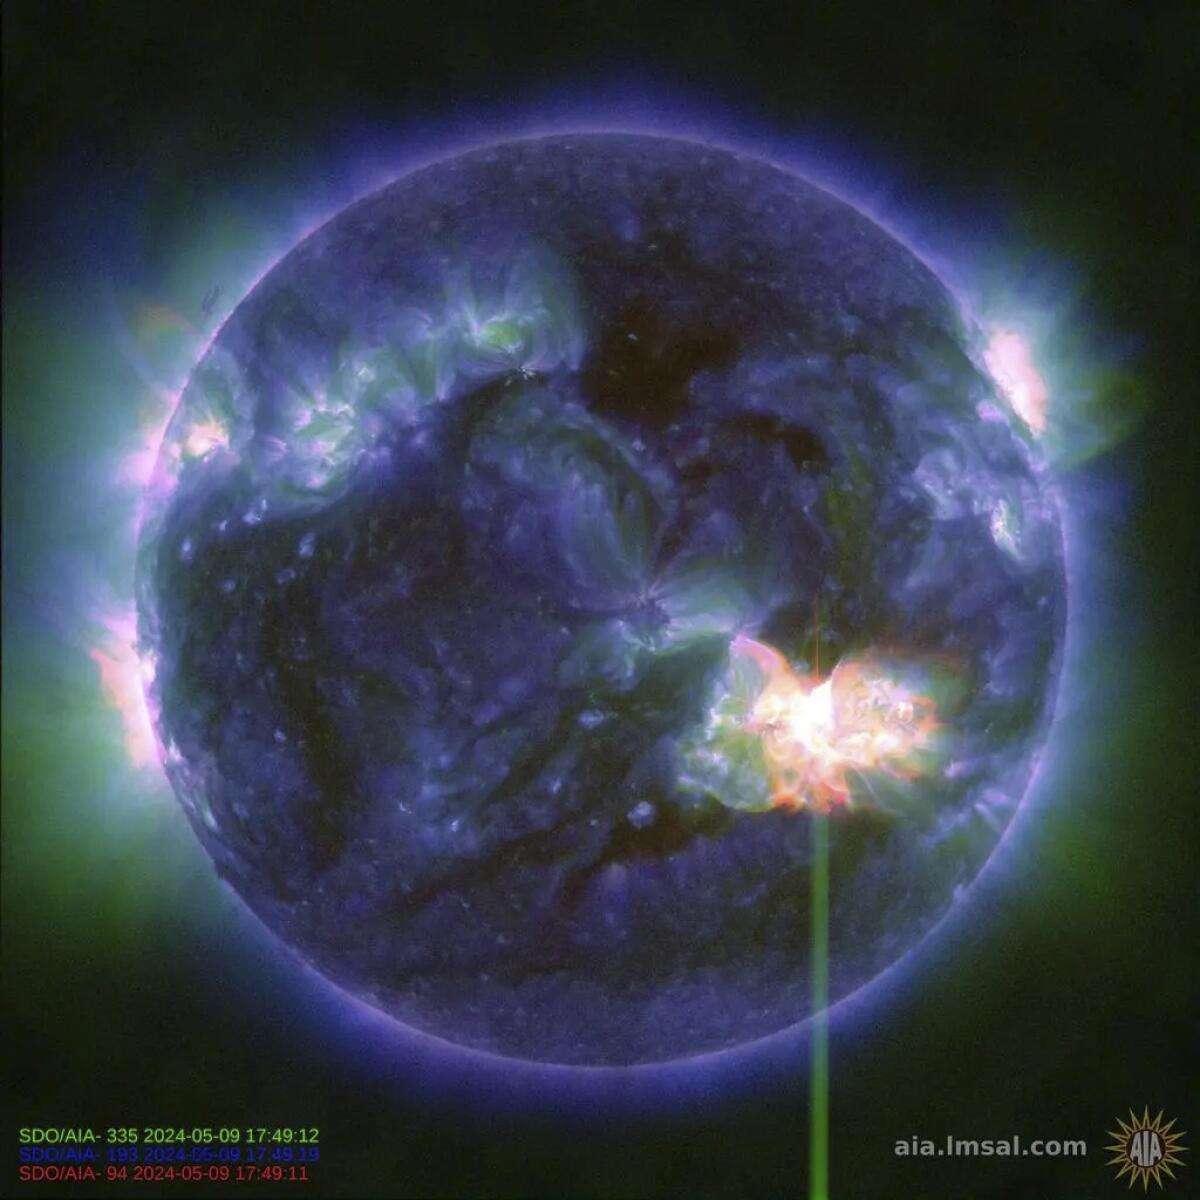 This image shows a solar flare, bright flash in lower right, captured by NASA’s Solar Dynamics Observatory on Thursday